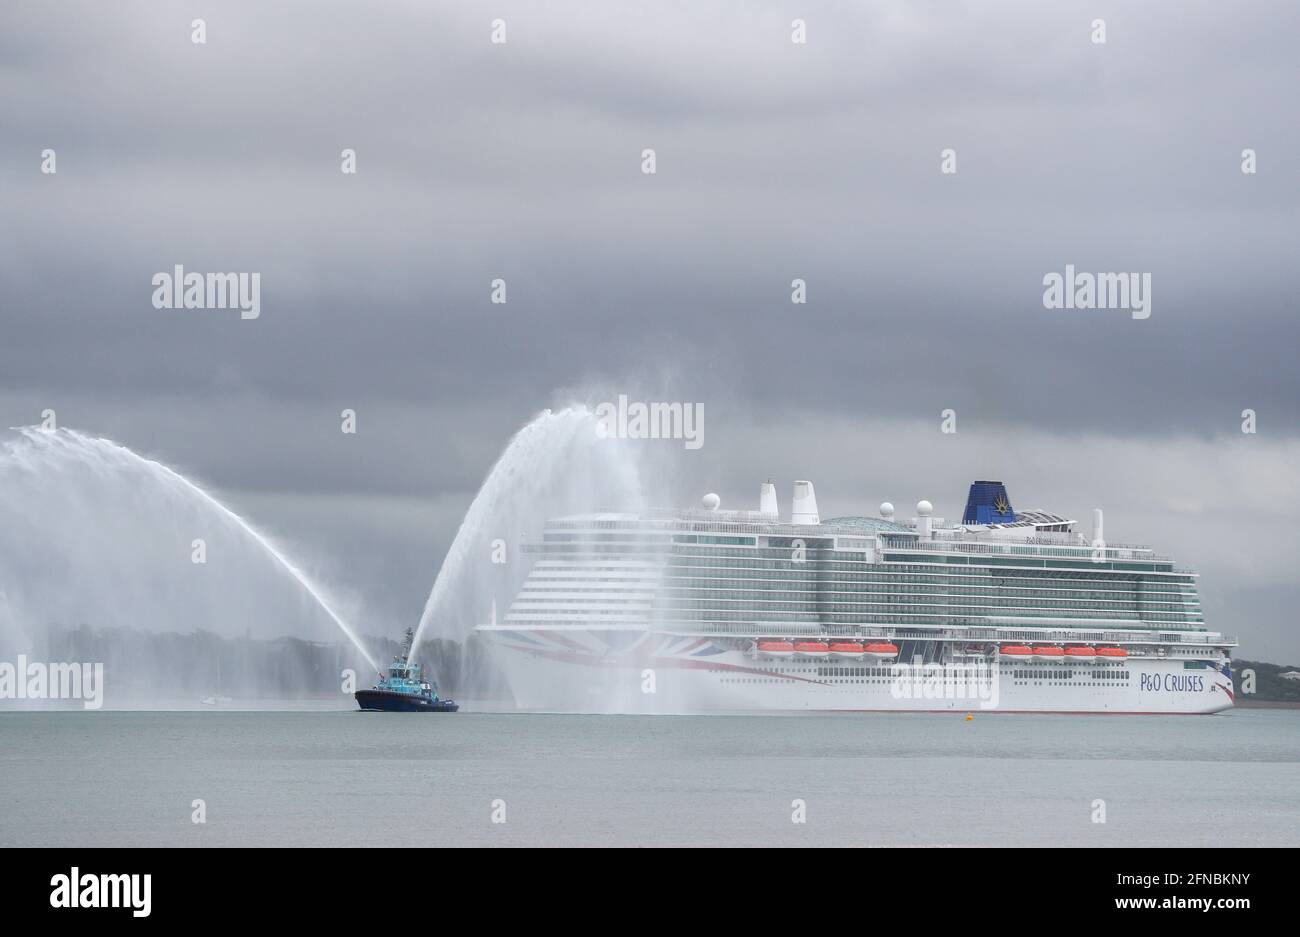 Southampton, Hampshire, UK. 16th May 2021. New P&O cruise ship Iona sails into Southampton. At 344 metres long, Iona is Britain’s largest cruise ship and will be named in Southampton Docks later today. The naming ceremony which will feature a performance by music star Gary Barlow is being held as a virtual event, with VIP guests watching the ceremony remotely. Credit Stuart Martin/Alamy Live News Stock Photo